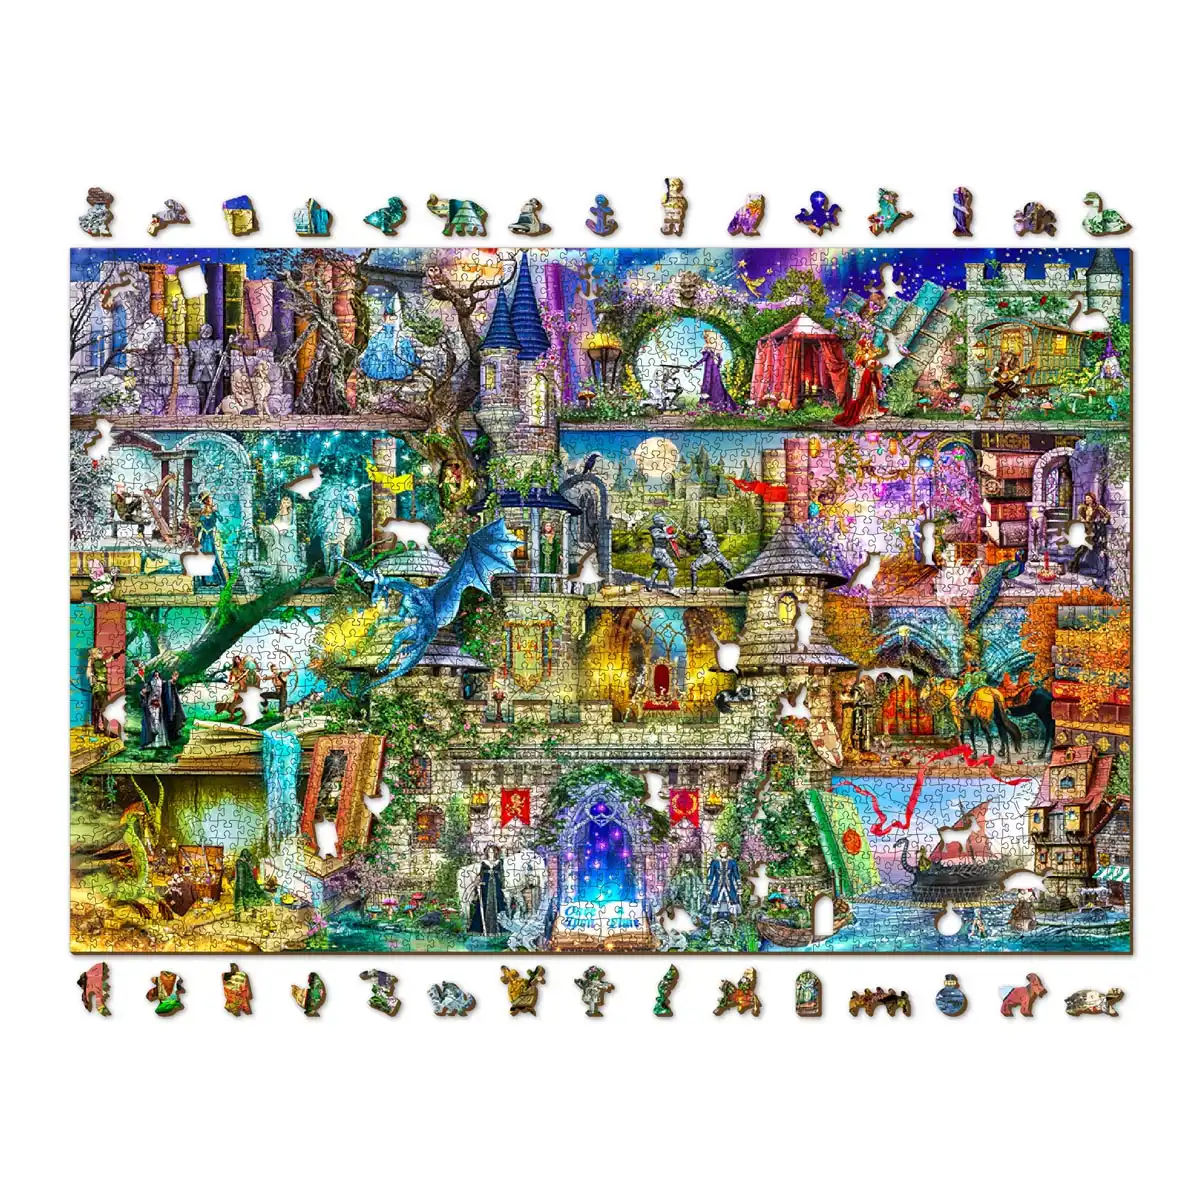 Wooden Puzzle 2000 Once Upon A Fairytale 